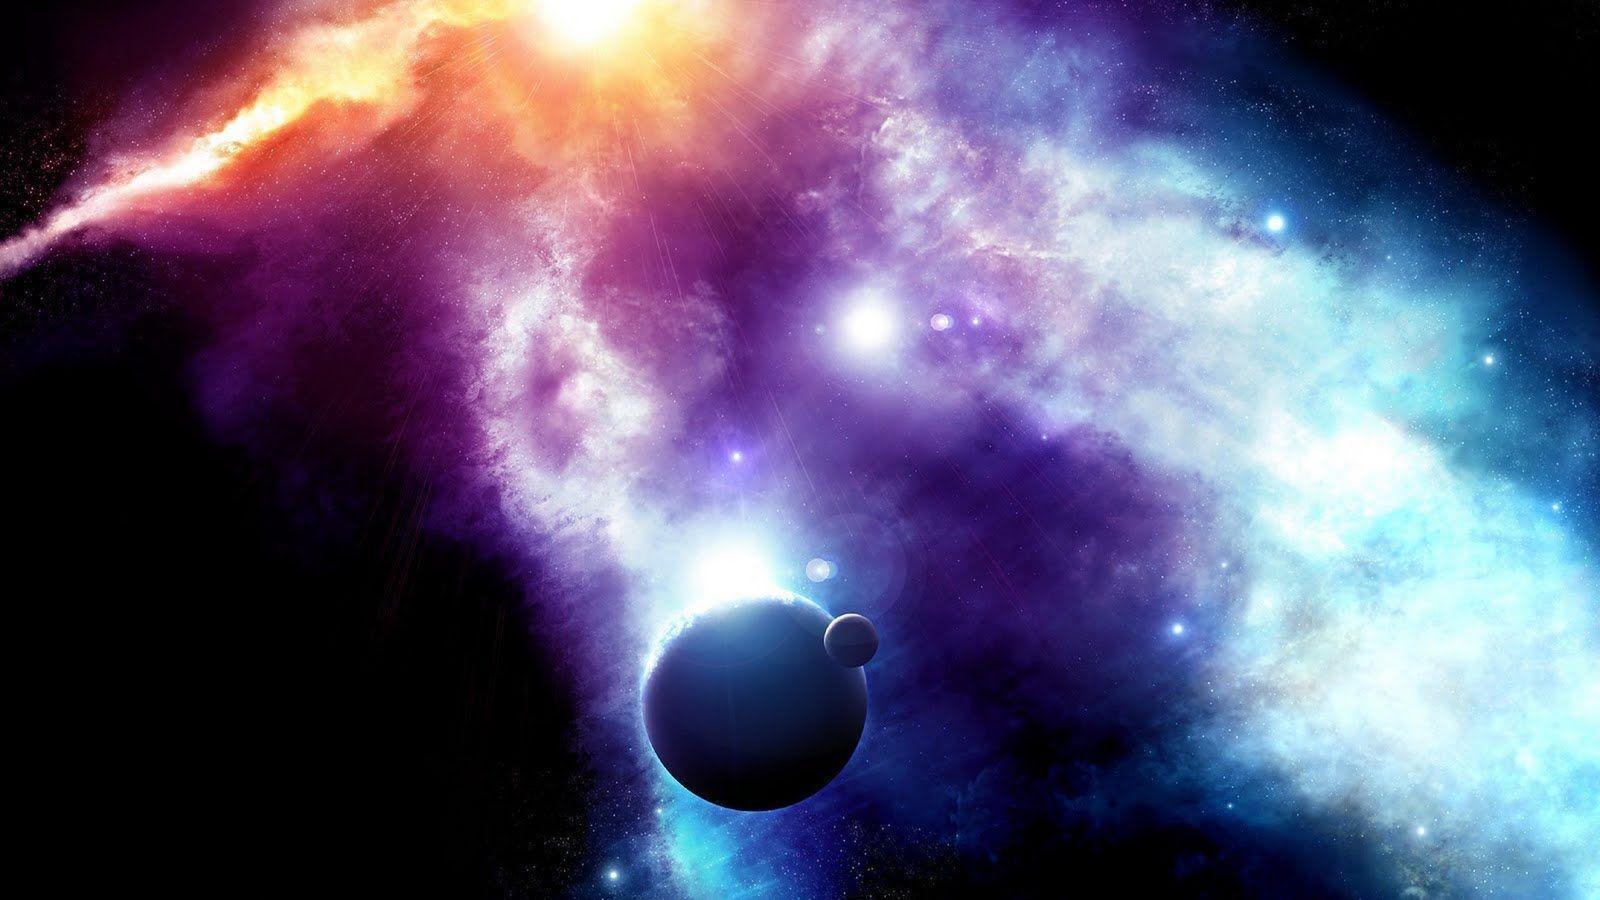 Hd Wallpaper Space Real HD 1080P 11 HD Wallpaper. Hdimges